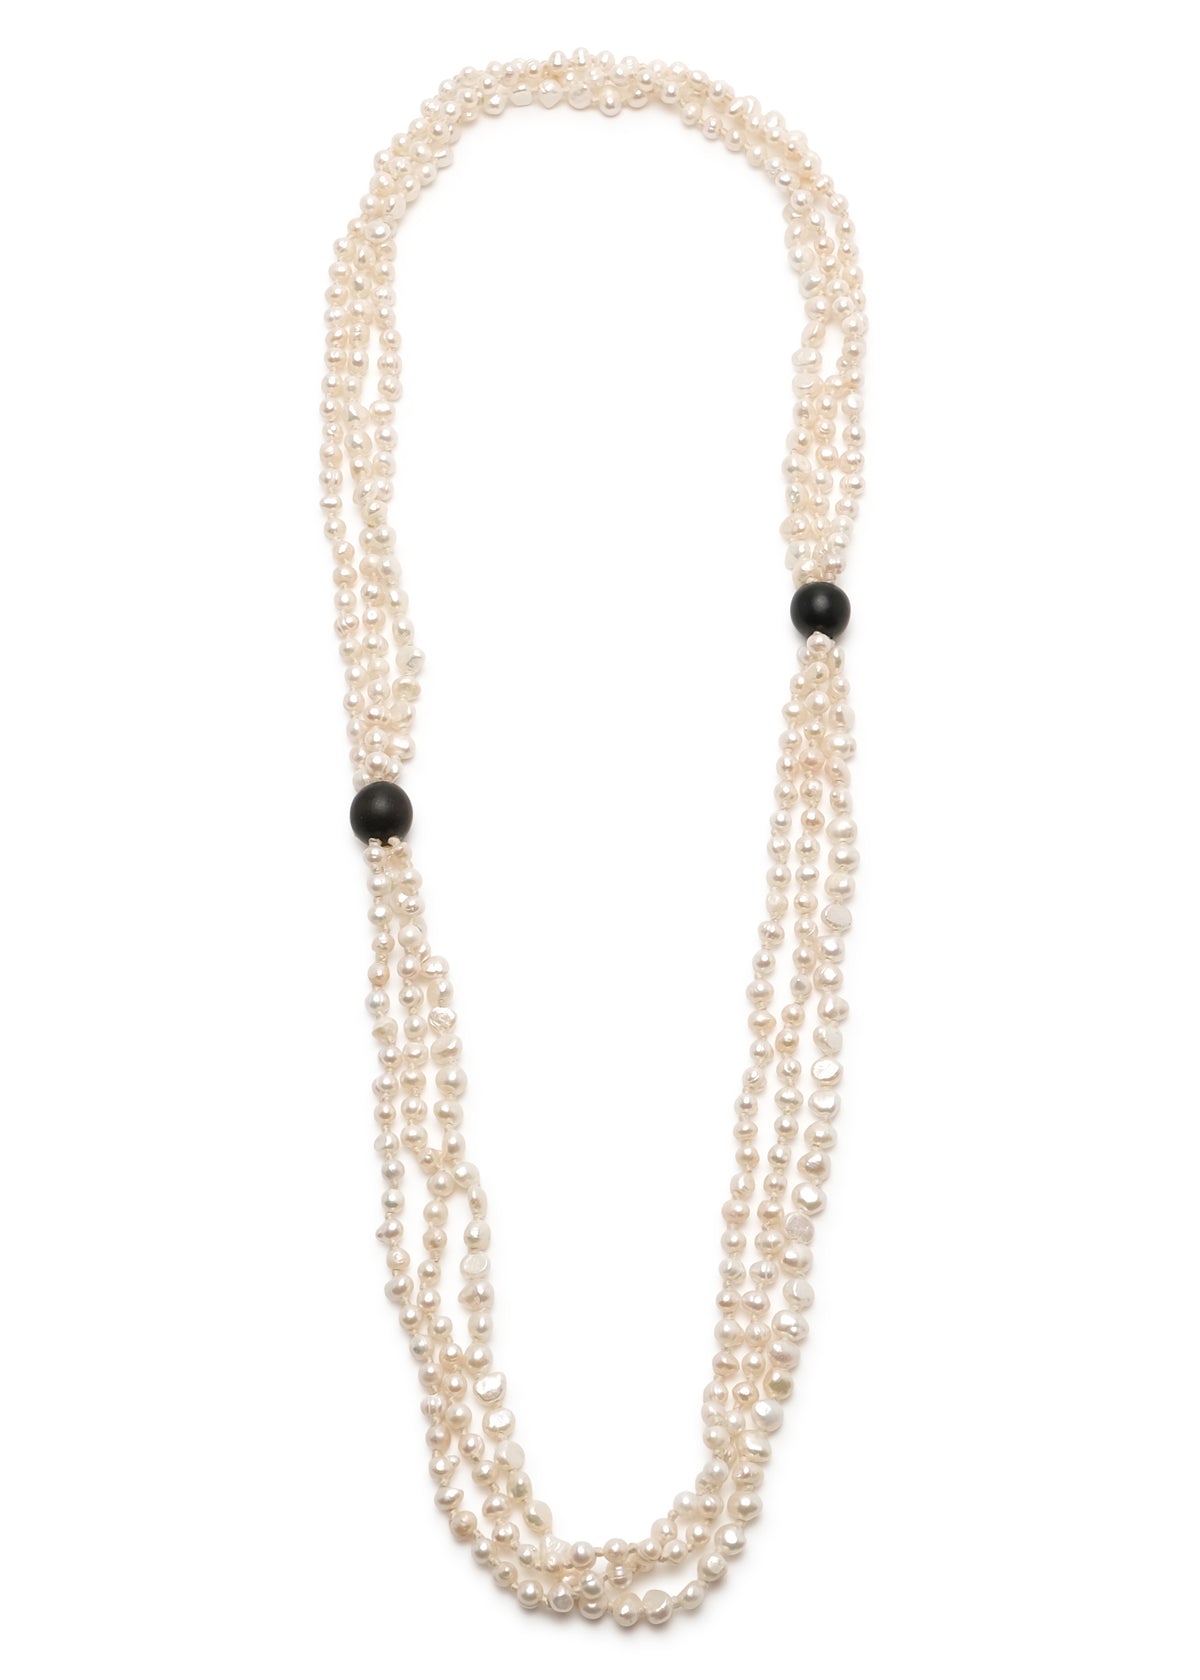 triple strand pearl necklace with wooden bead detail